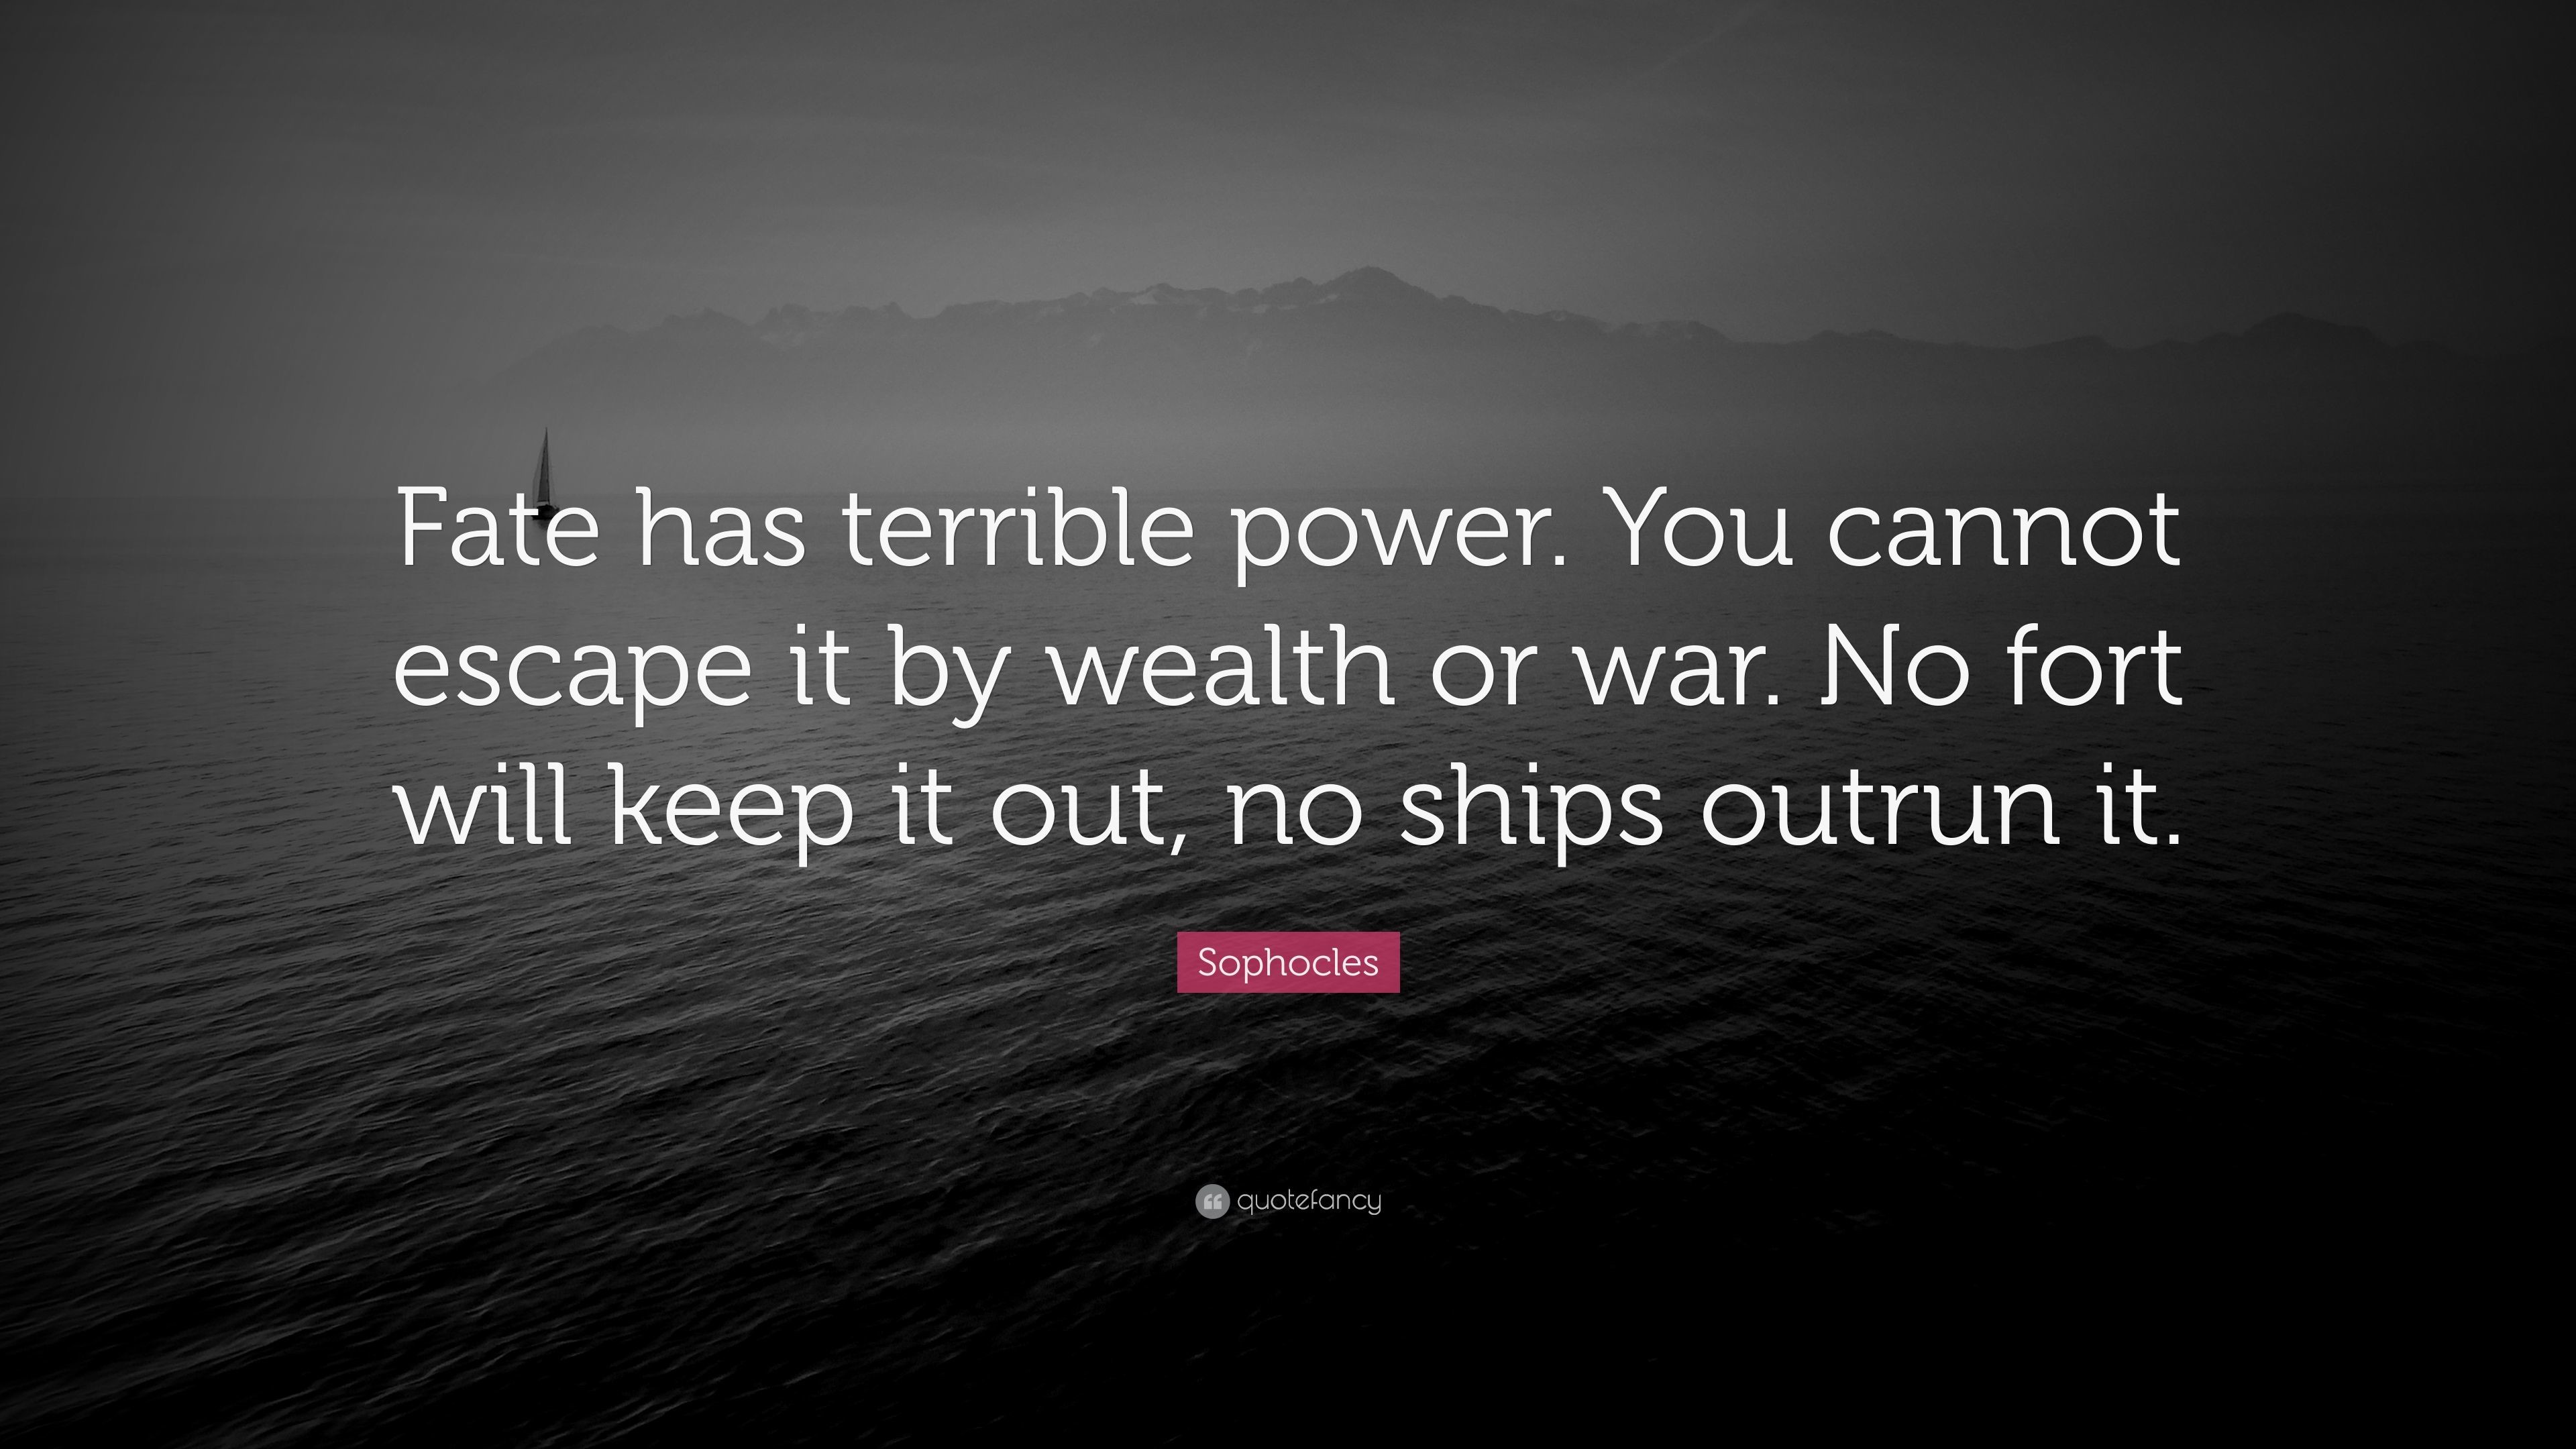 3840x2160 Sophocles Quote: “Fate has terrible power. You cannot escape it by wealth or